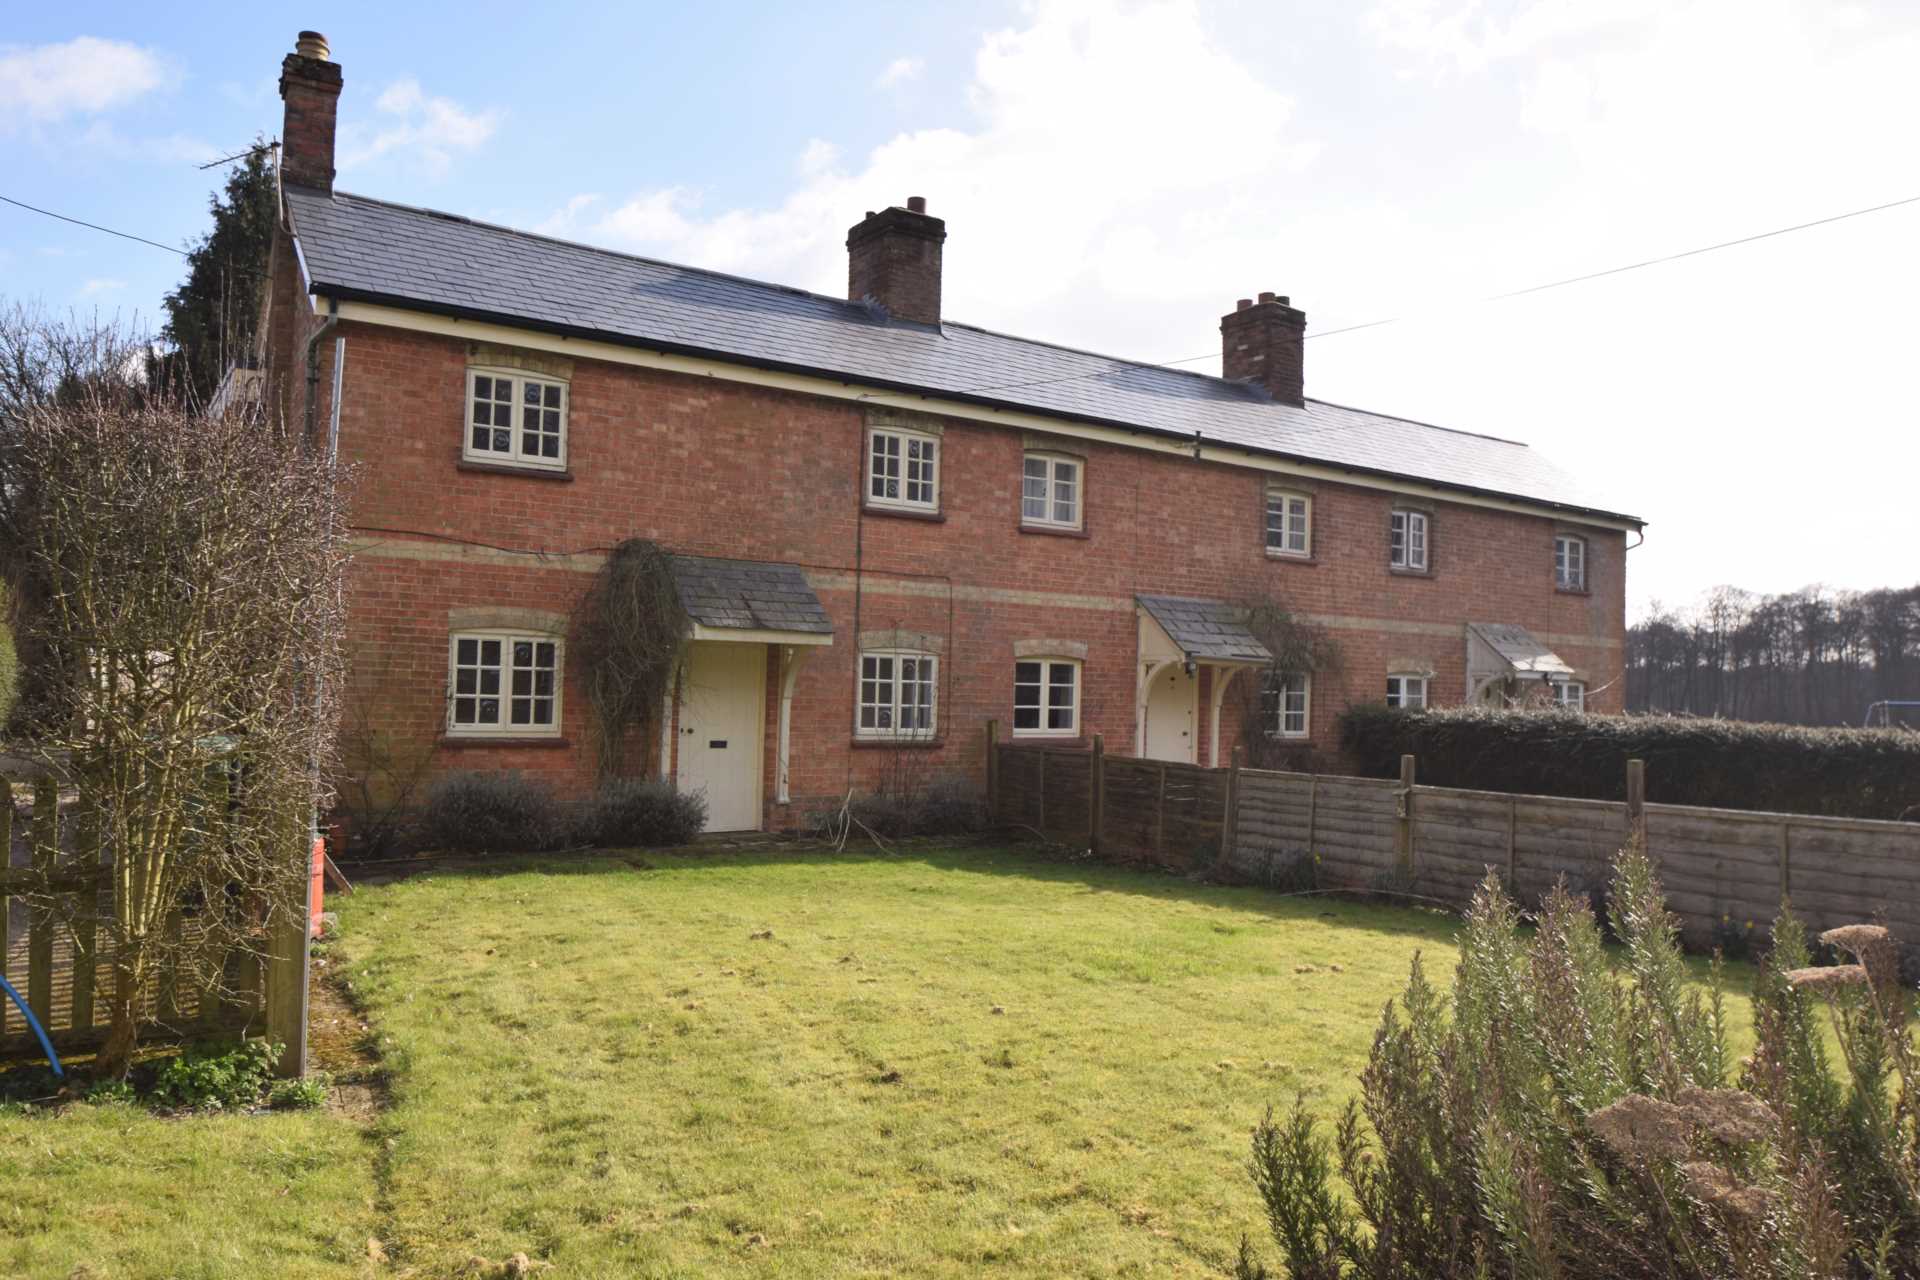 3 bed End Terraced House for rent in Watlington. From Griffith & Partners - Watlington